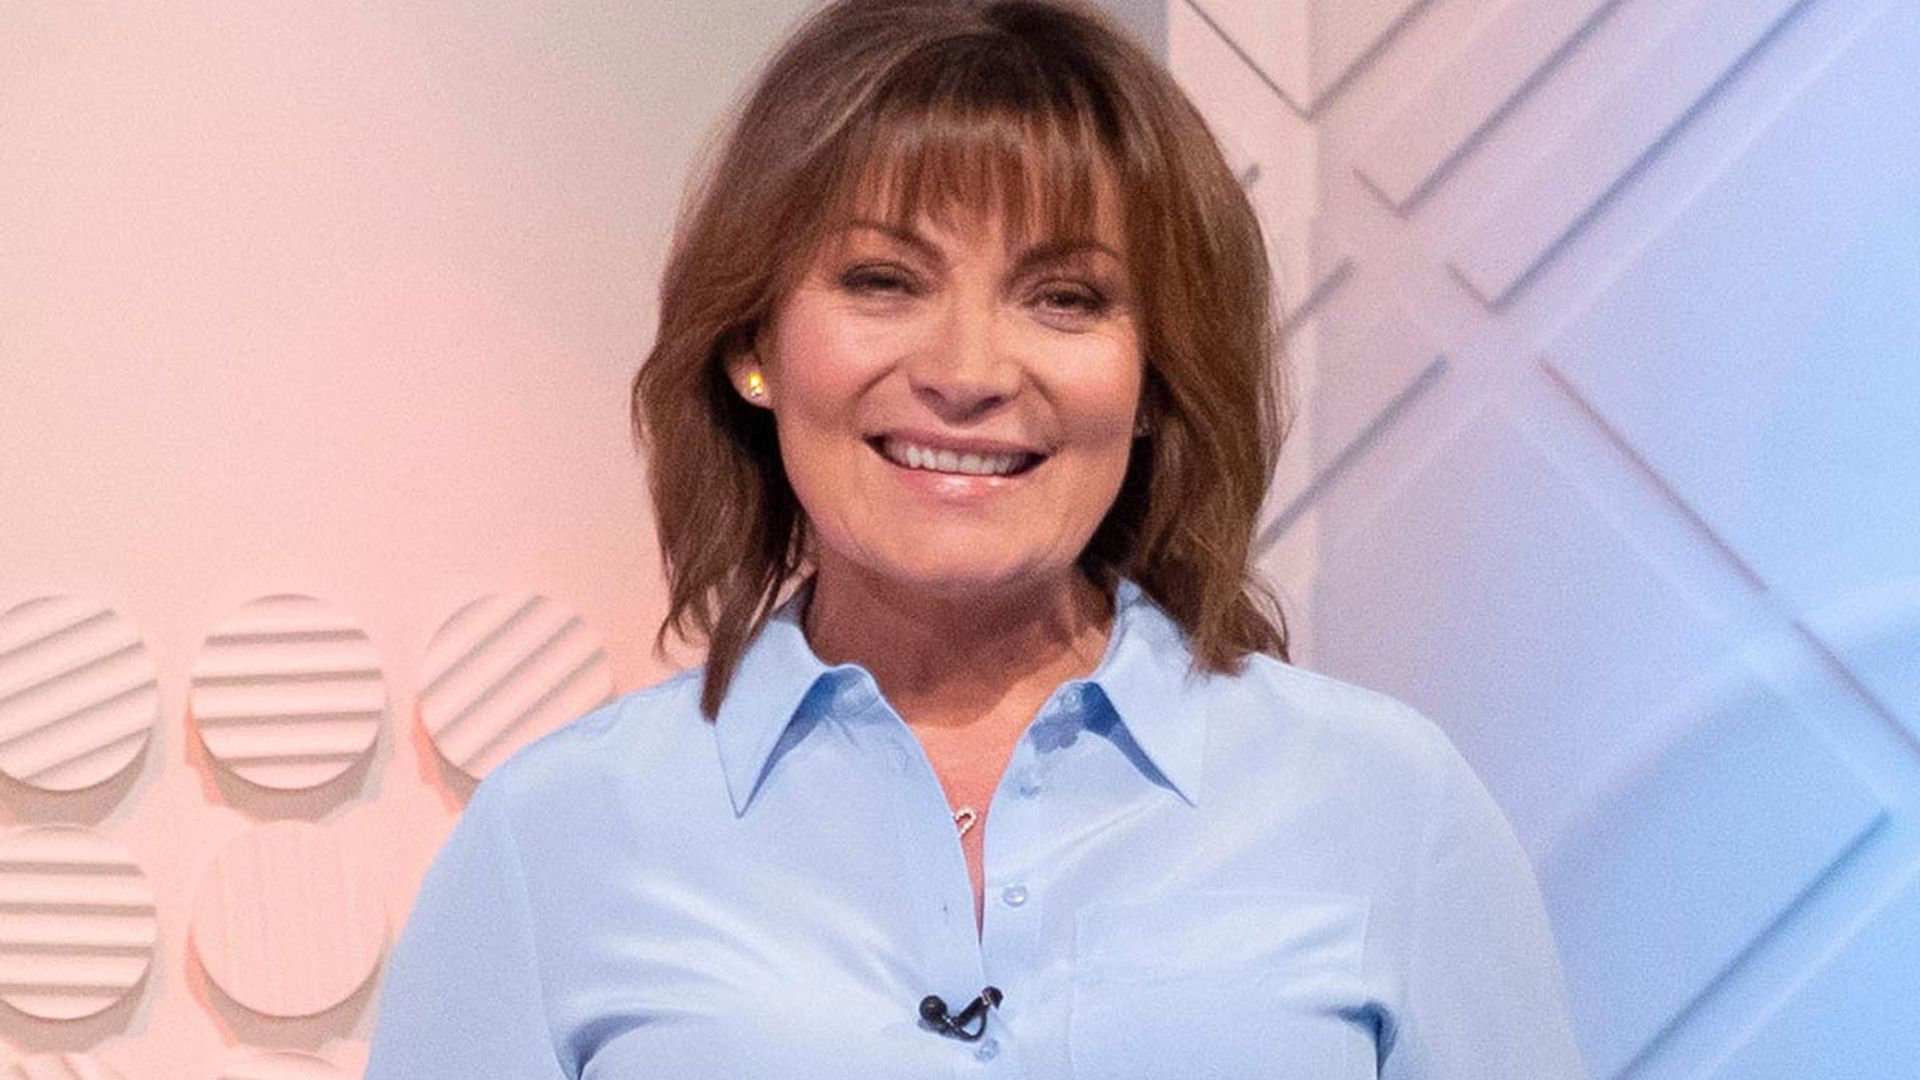 Lorraine Kelly’s baby blue work dress is very Kate Middleton, don’t you think?